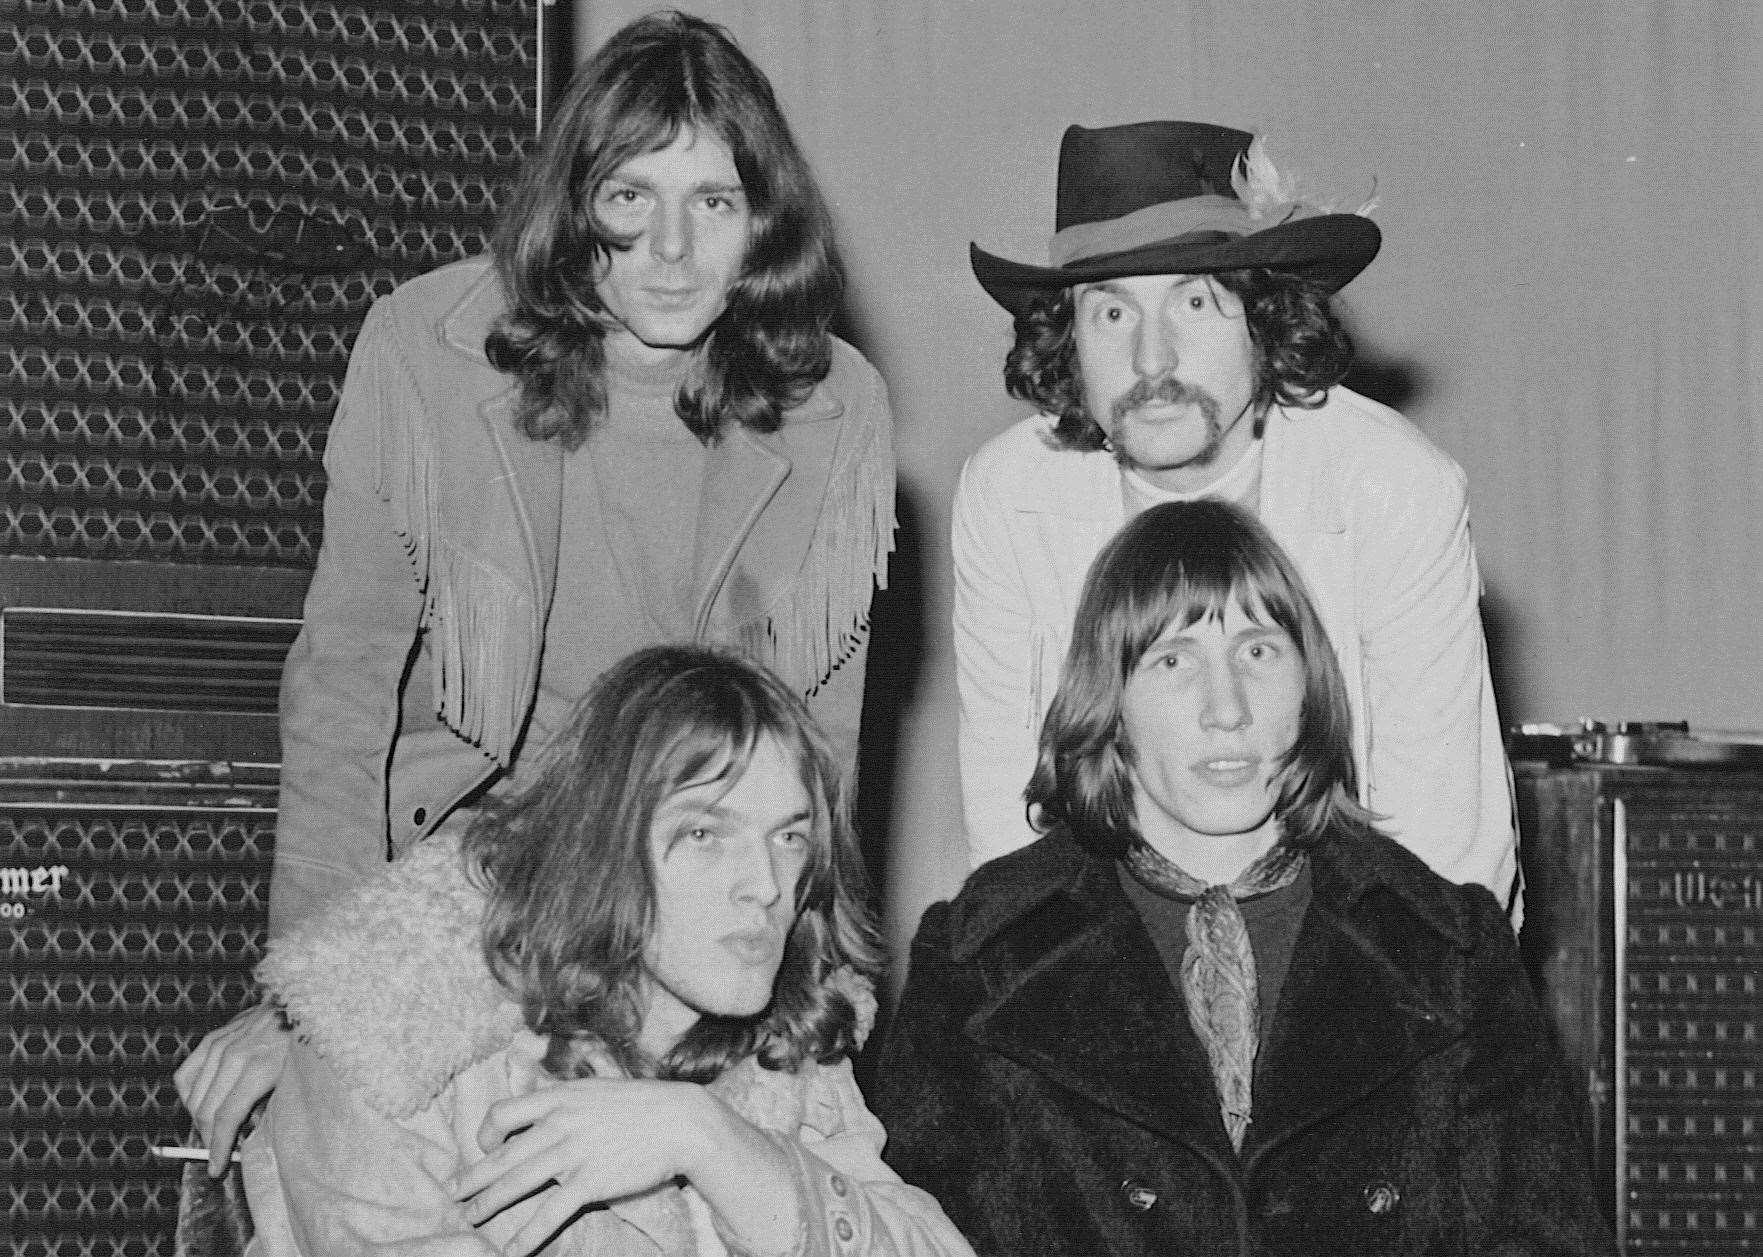 Pink Floyd at their appearance in Canterbury in 1969